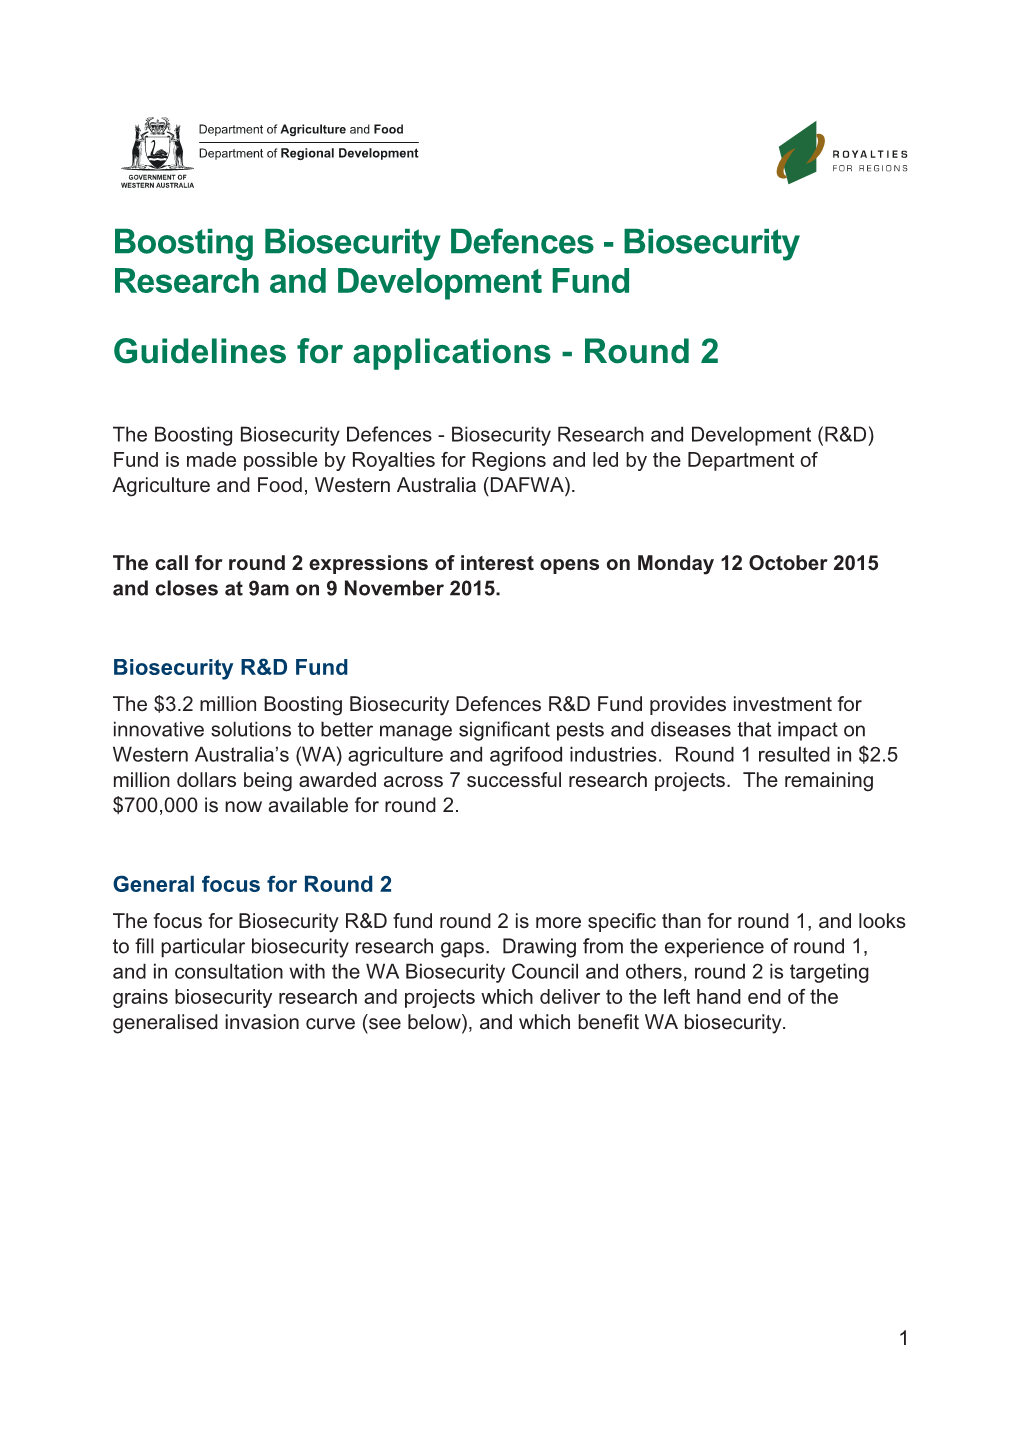 Boosting Biosecurity Defences - Biosecurity Research and Development Fund